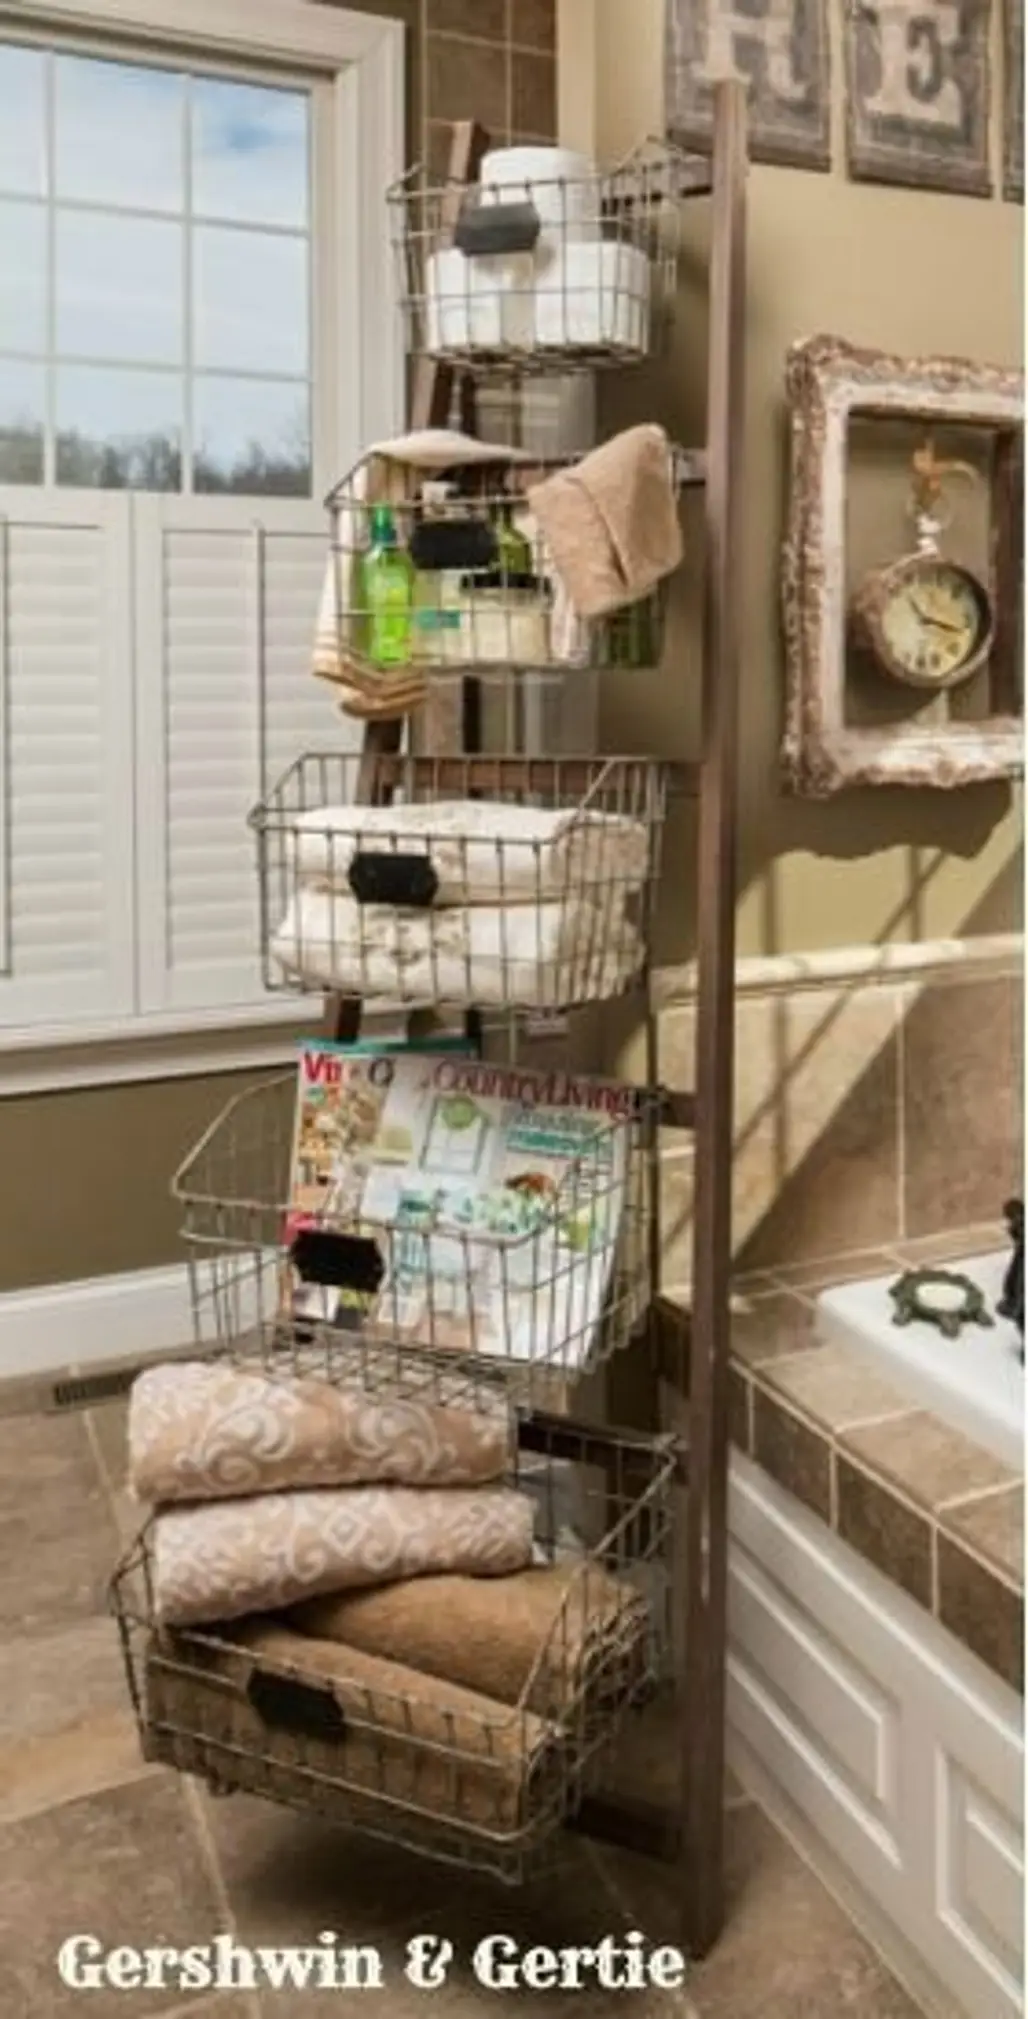 37 Storage Baskets That Will Make You Want to Organize Your Whole House